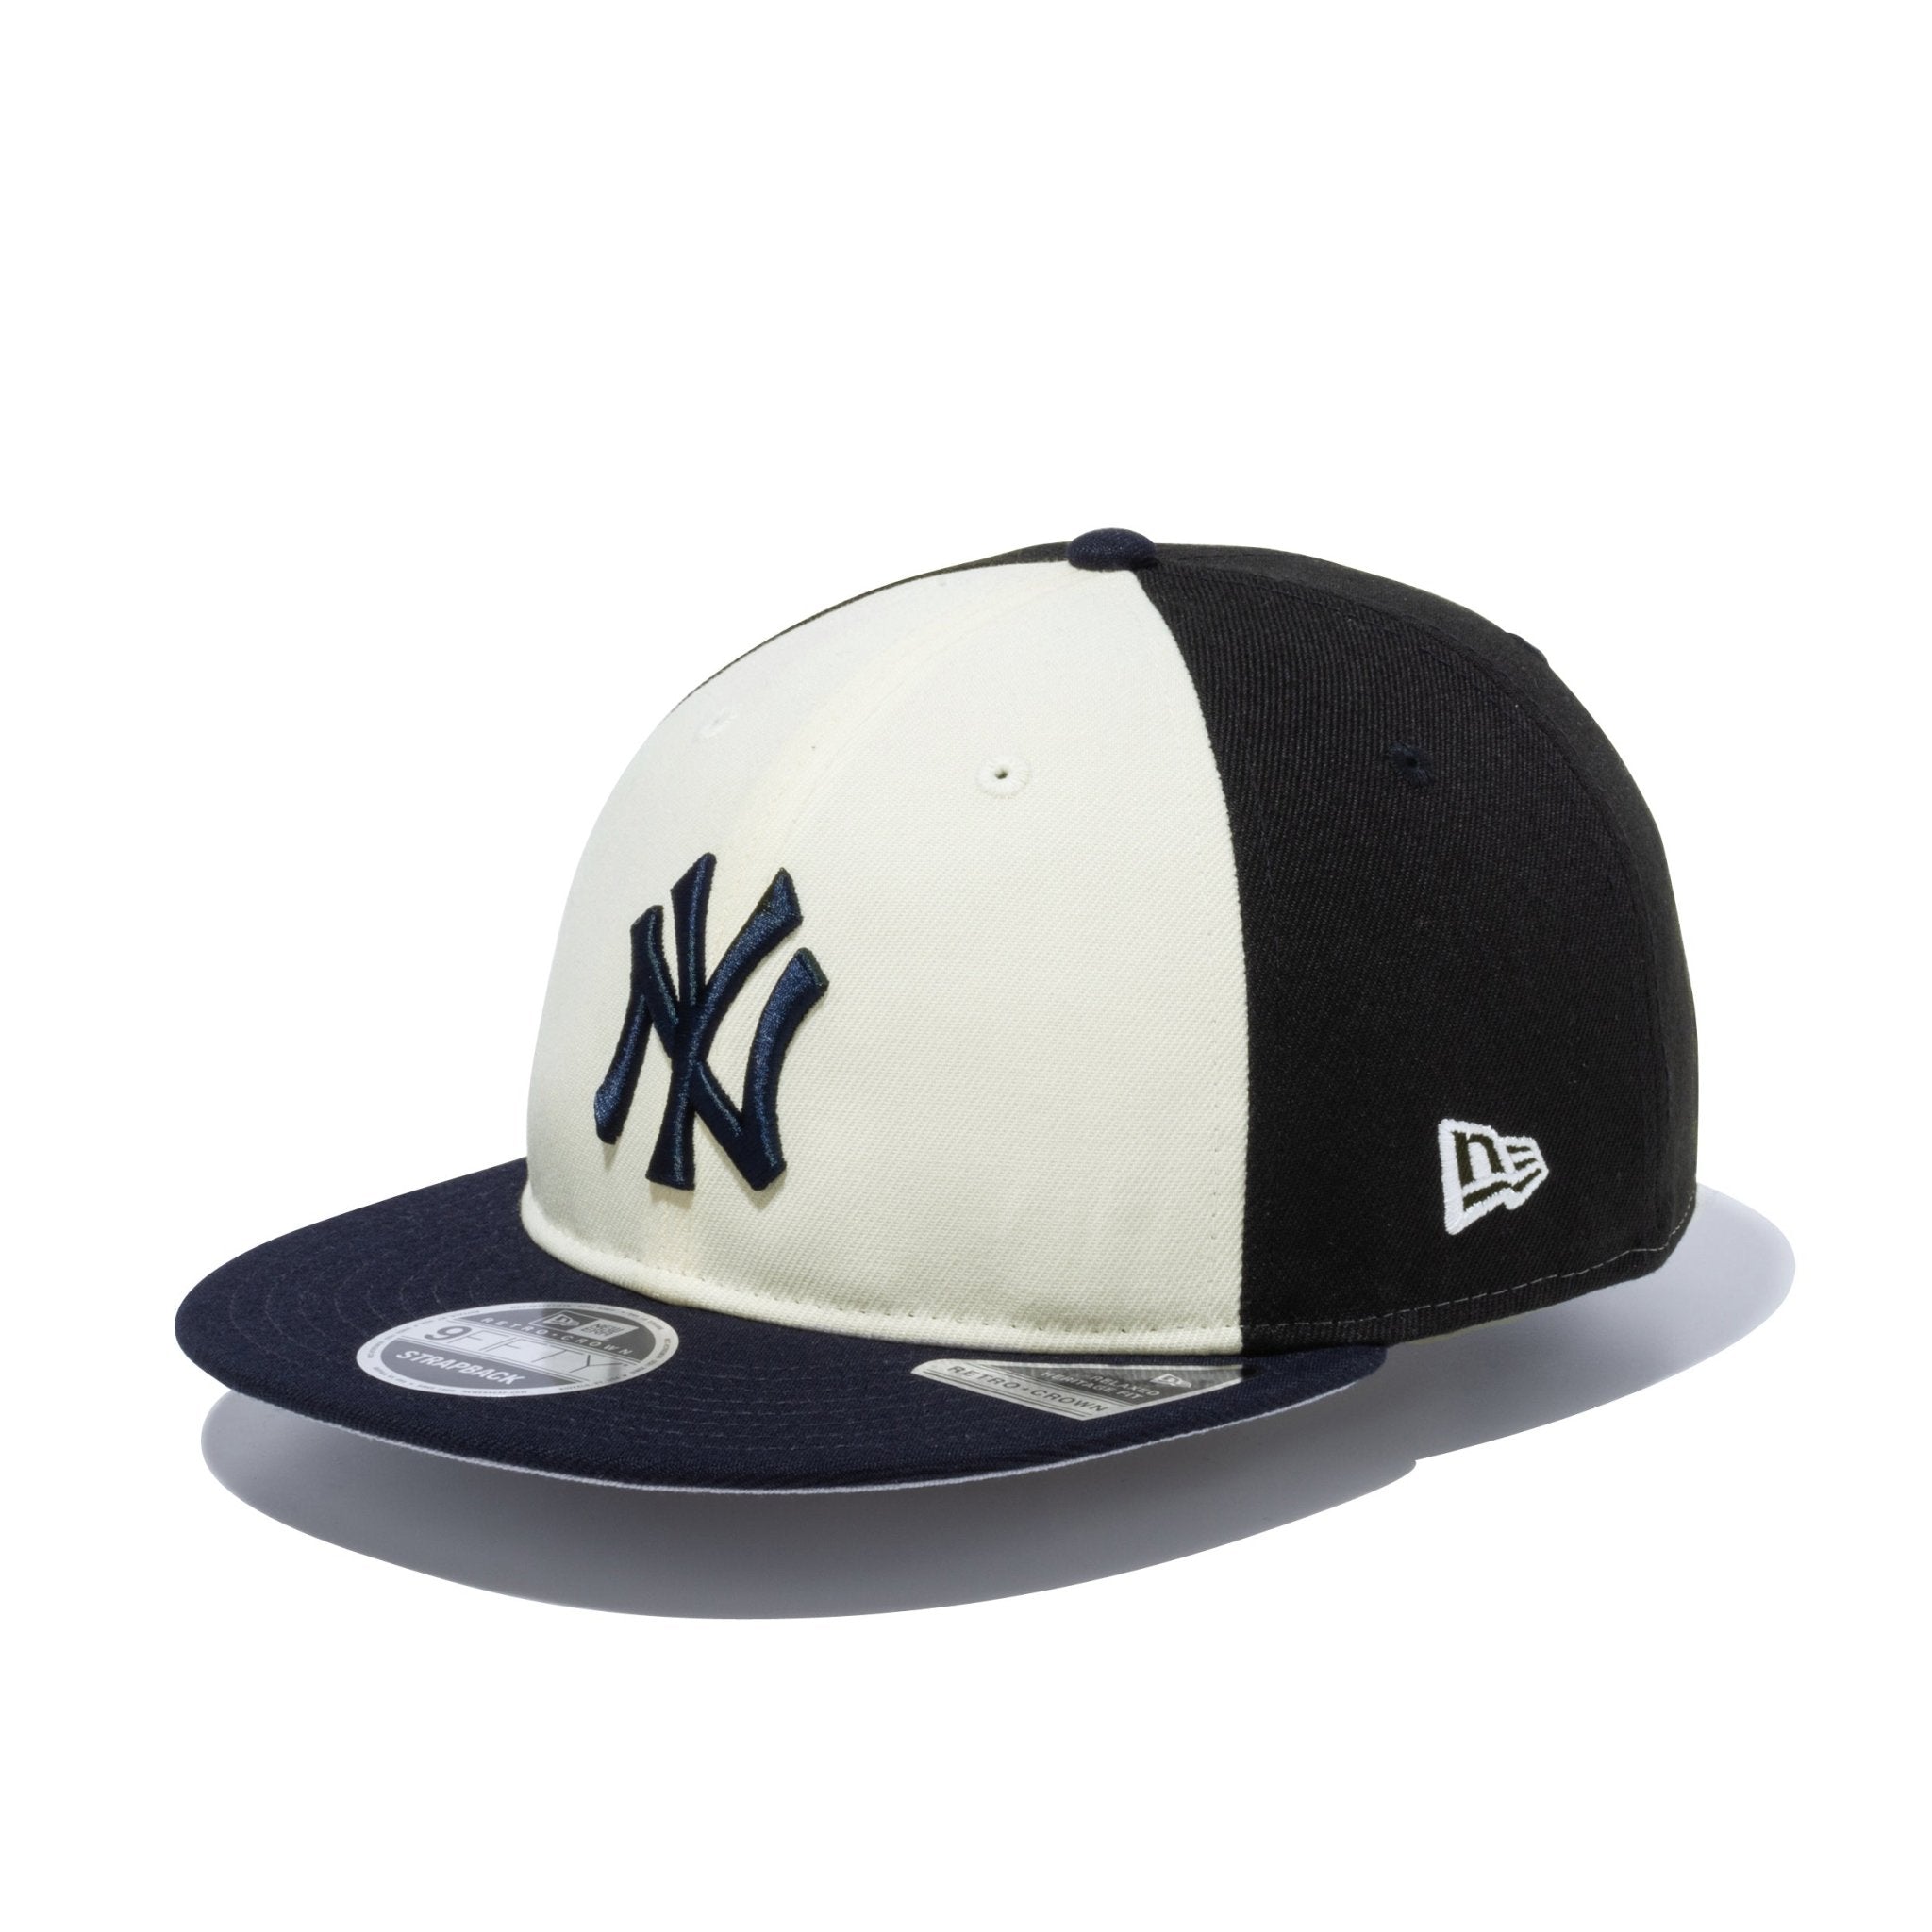 RC 9FIFTY MLB Retro Color ニューヨーク・ヤンキース クローム